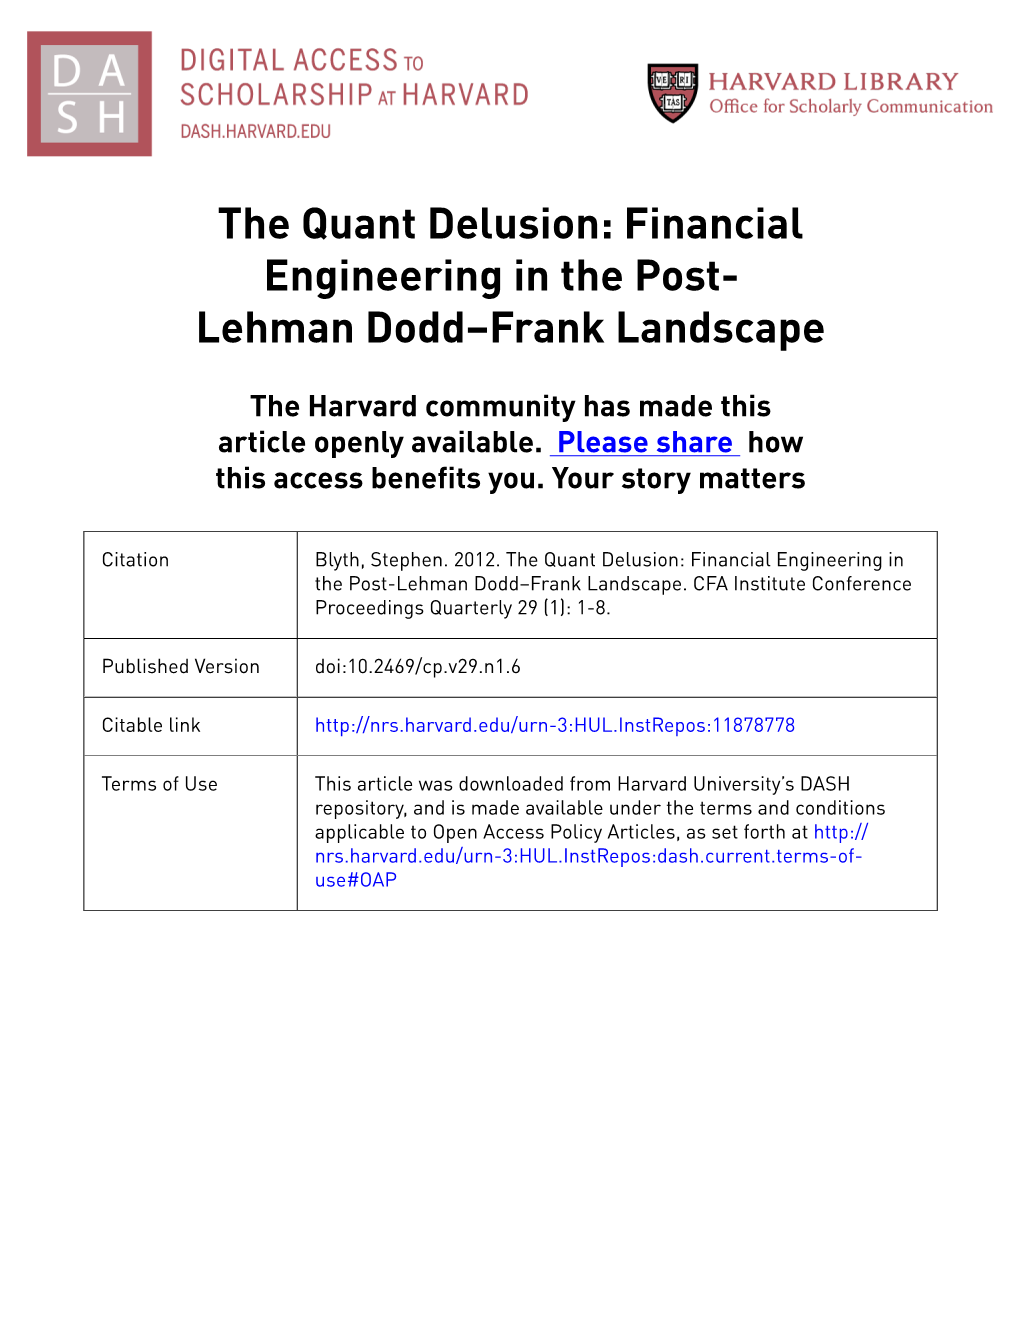 The Quant Delusion: Financial Engineering in the Post- Lehman Dodd–Frank Landscape